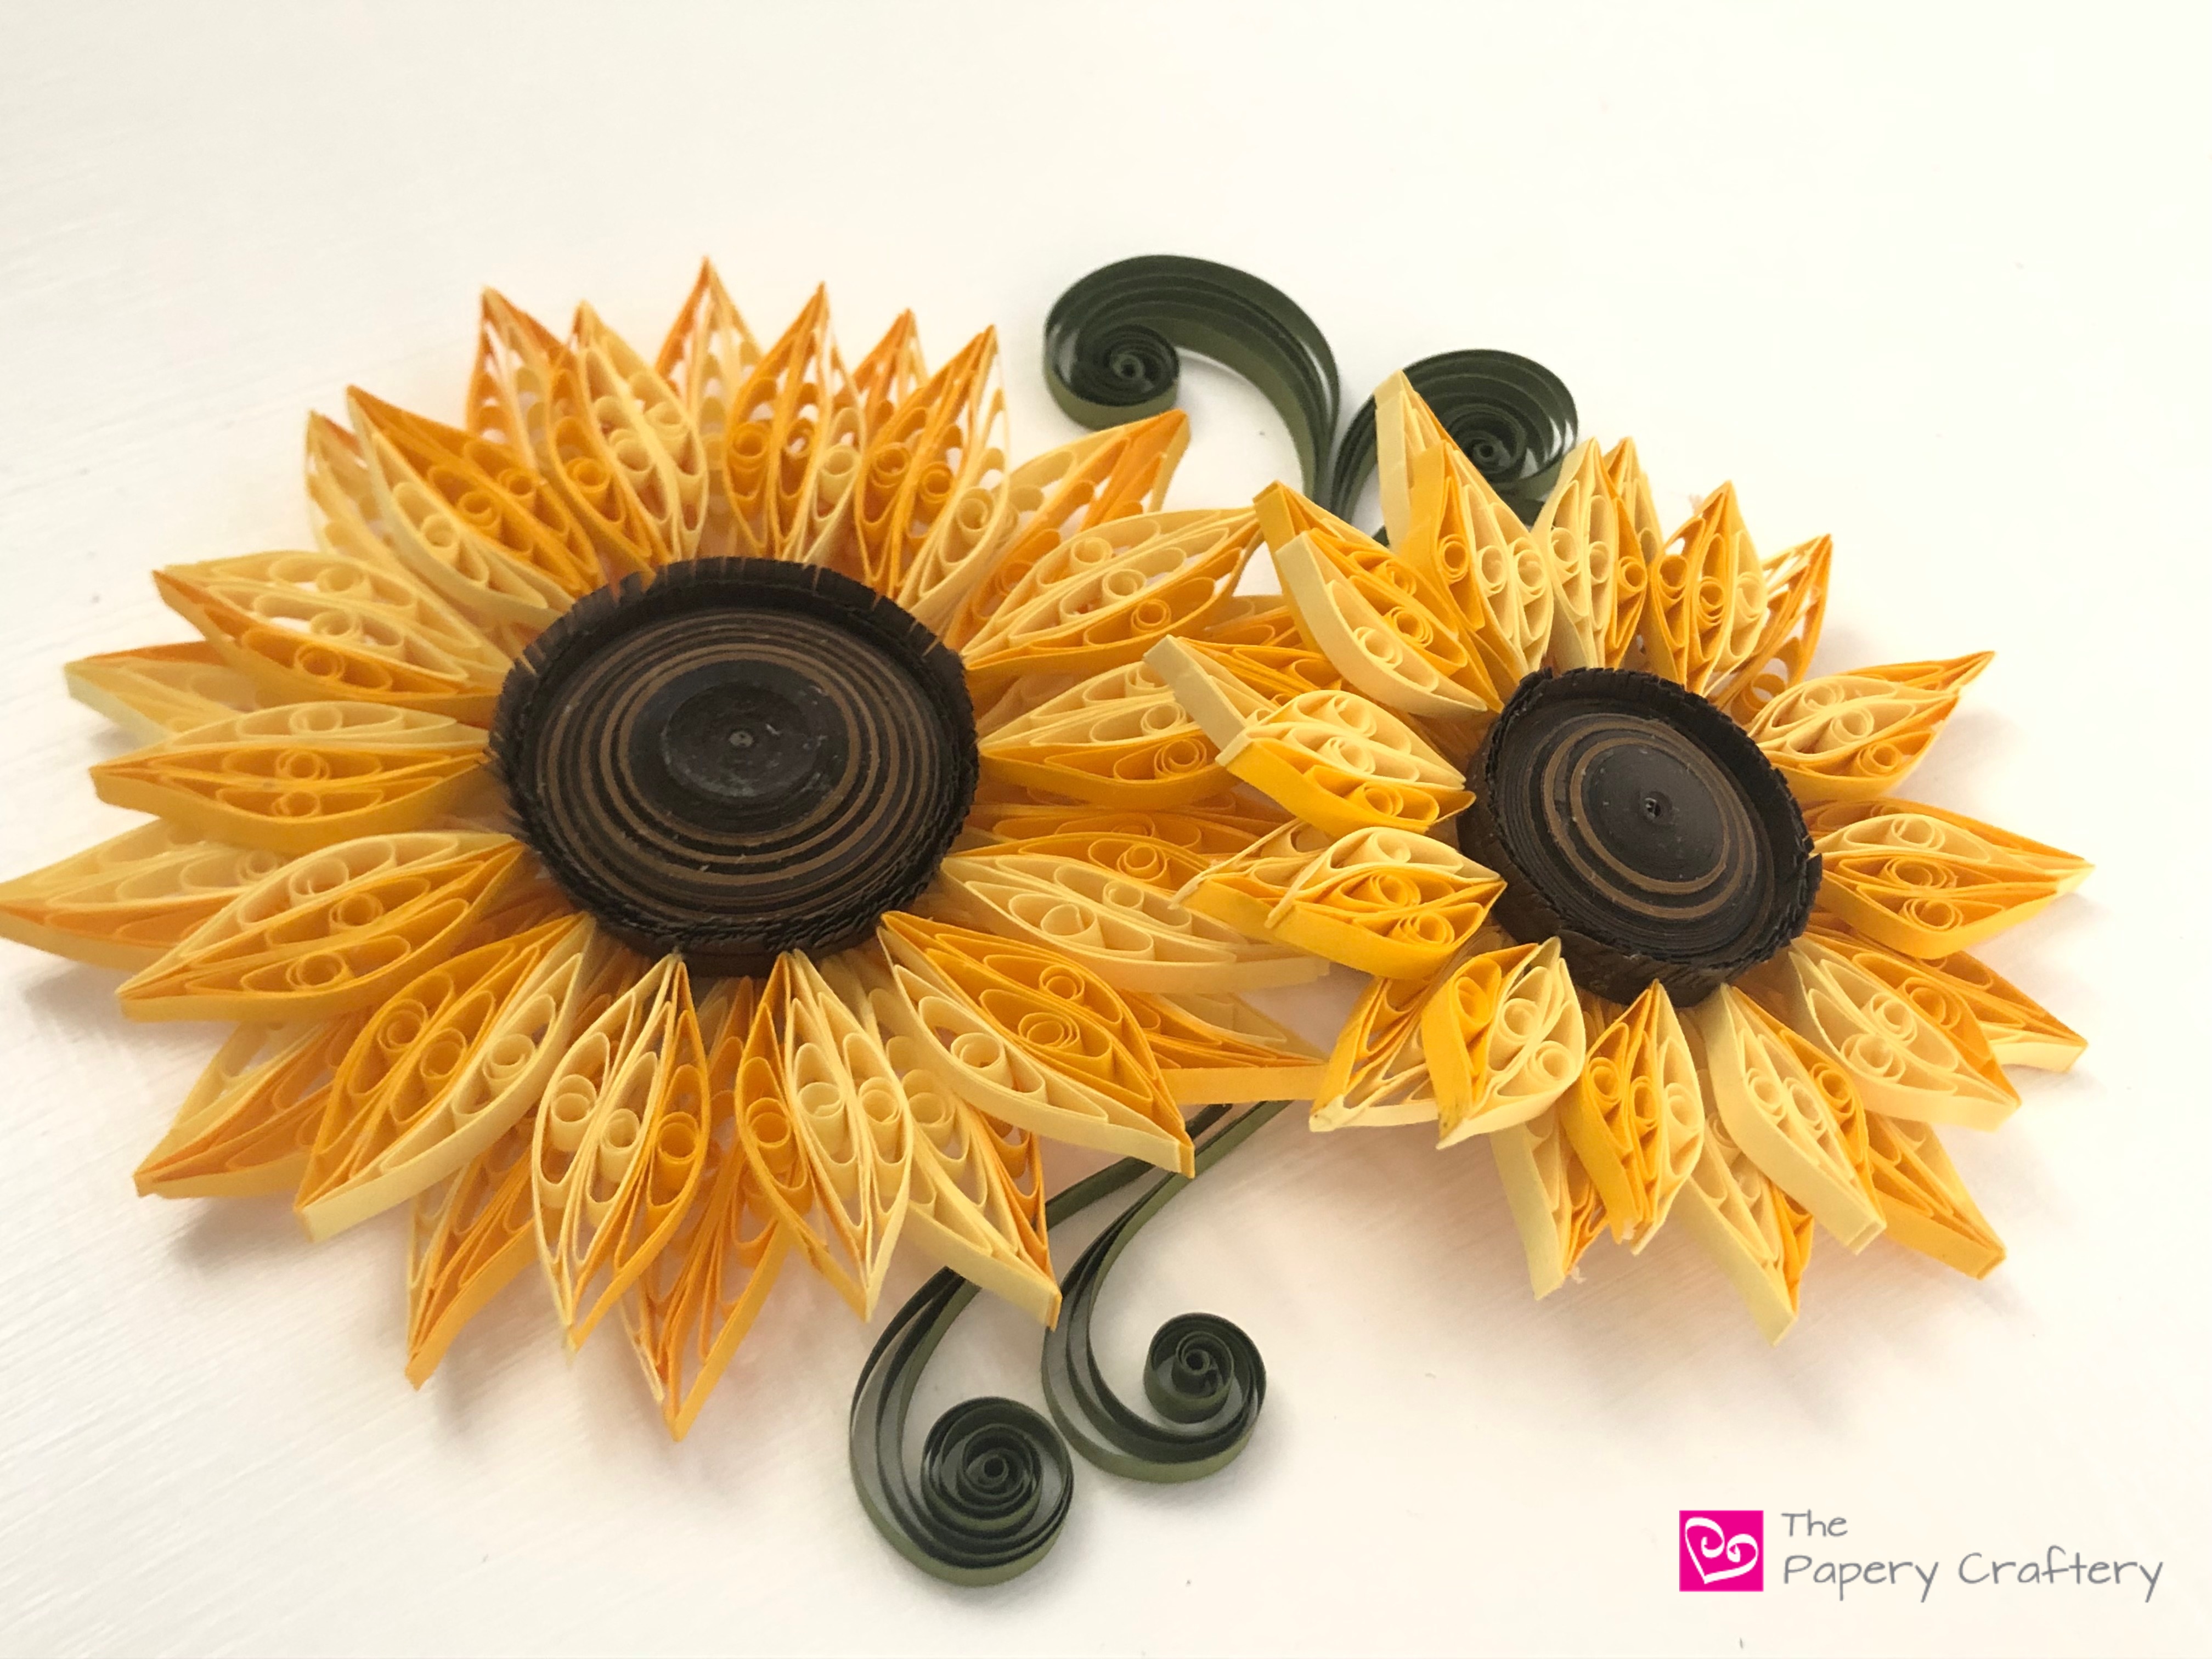 Easy Quilling Projects: Paper Quilling Ideas That Are Sure To Inspire You:  List of Paper Quilling Crafts for The Entire Year